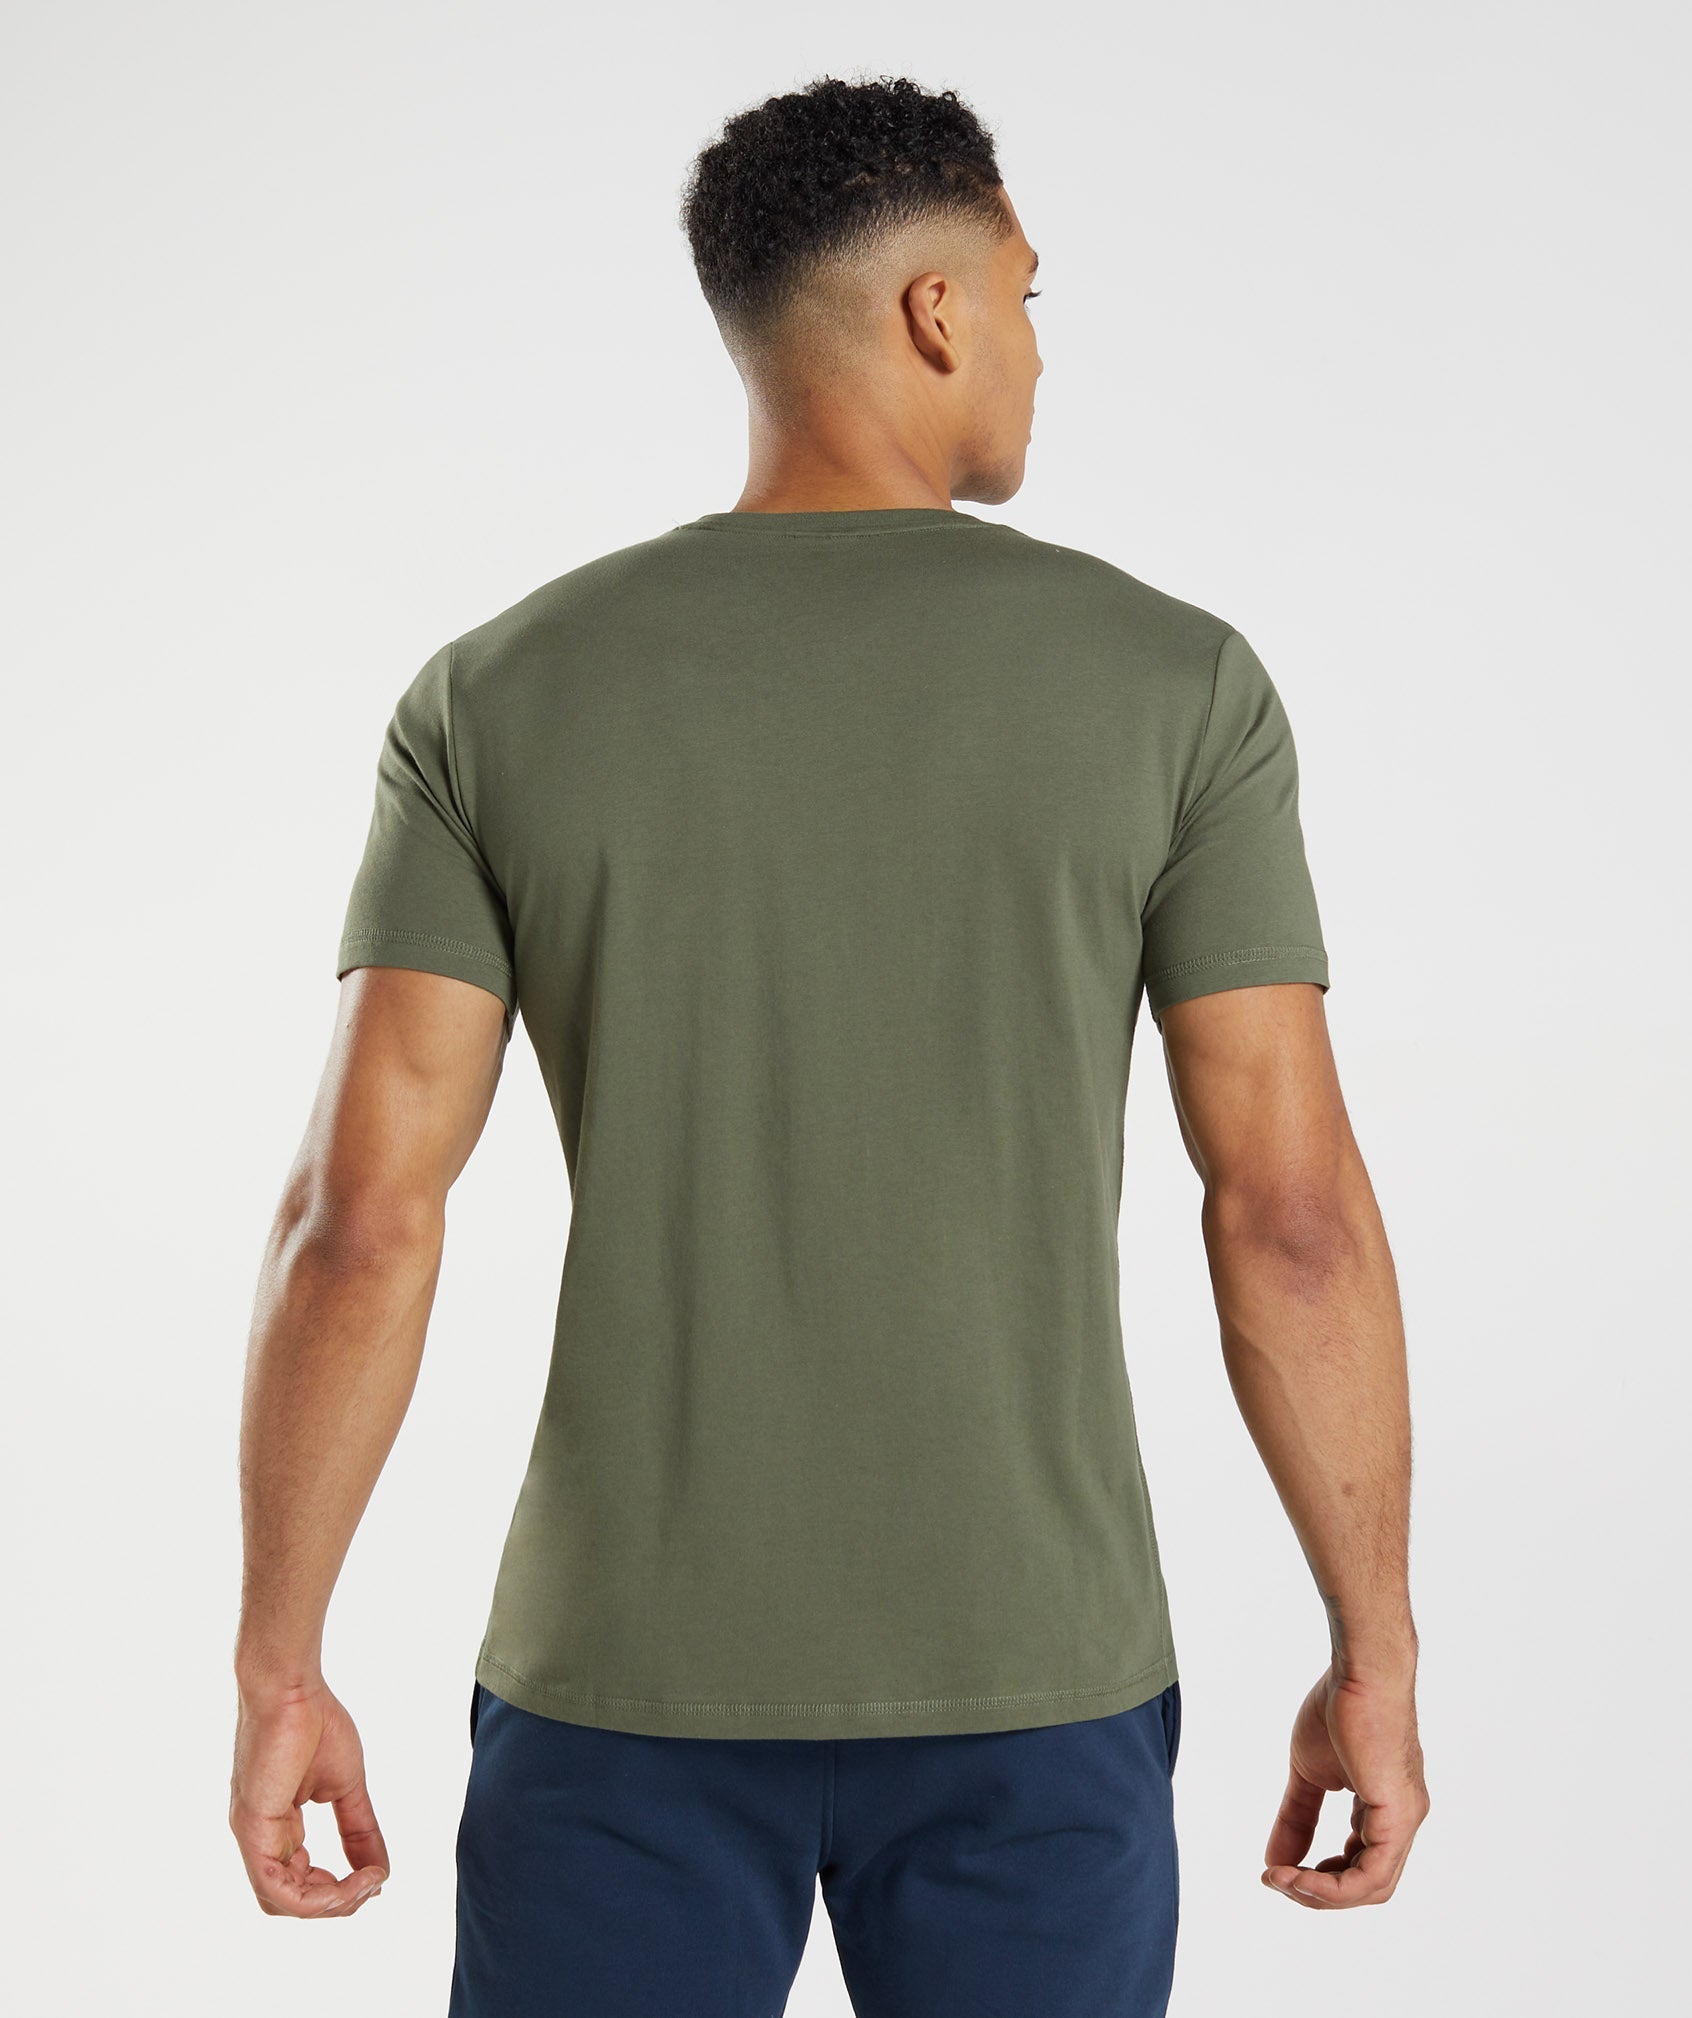 Sharkhead Infill T-Shirt in Core Olive - view 2